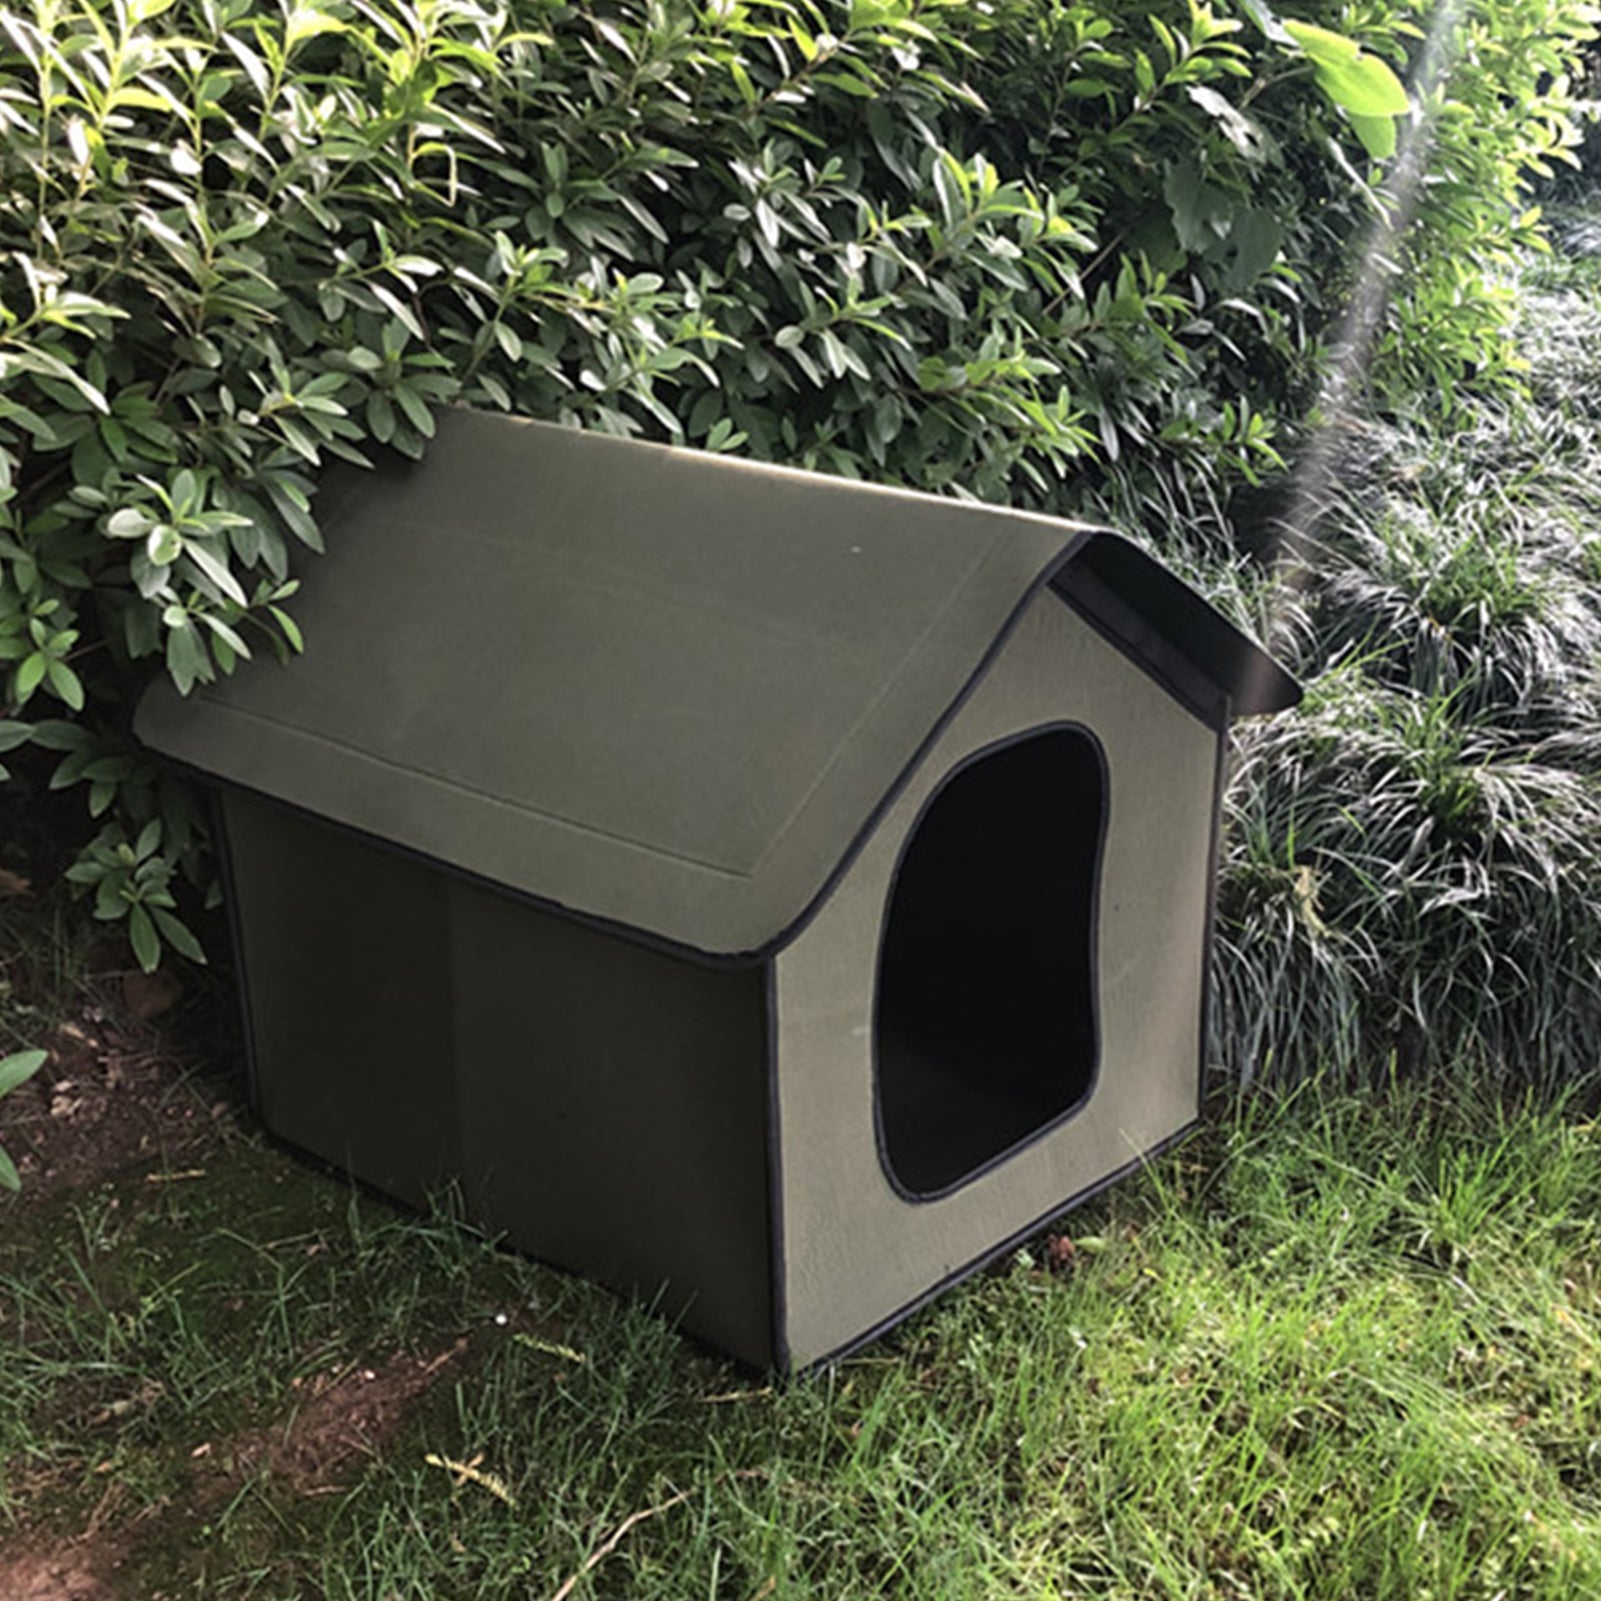 Flm Pet House Waterproof Villa Cat Little Kennel Collapsible Dog Shelter for Outdoor